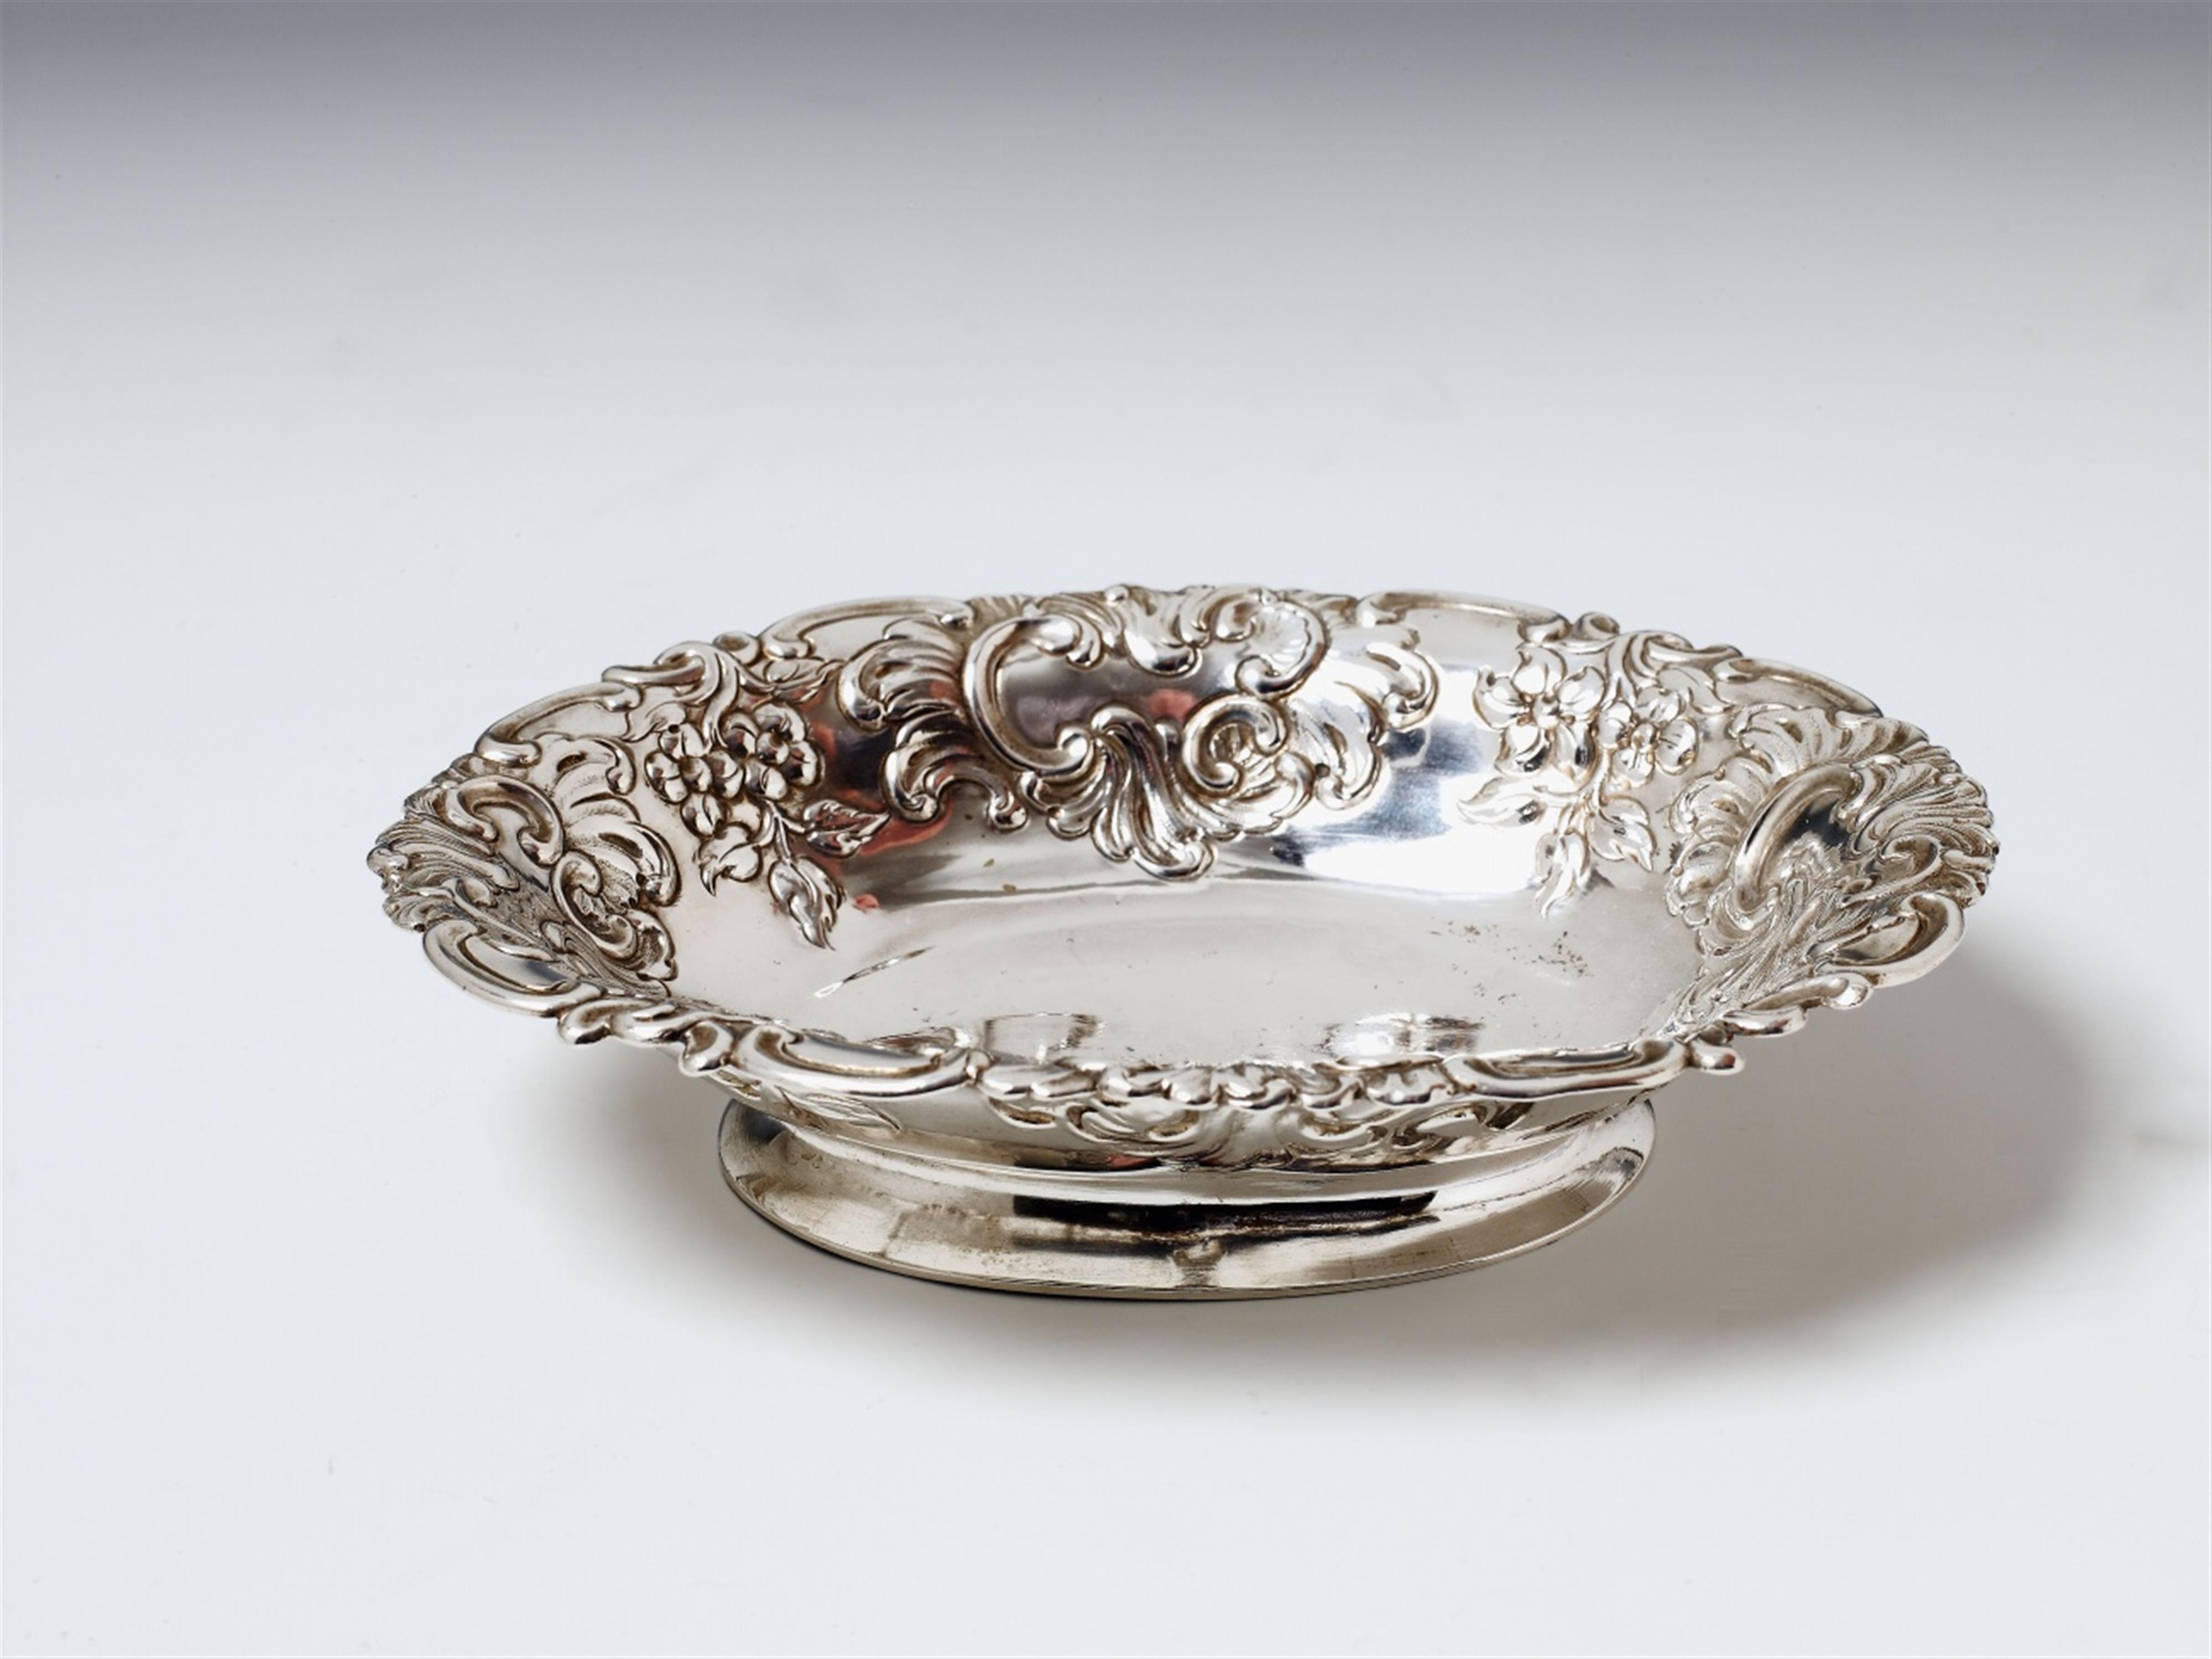 A Berlin silver sweets dish. Monogrammed "F.H.K." and dated 1803. Indistinct maker's mark, ca. 1760 - 70. - image-1